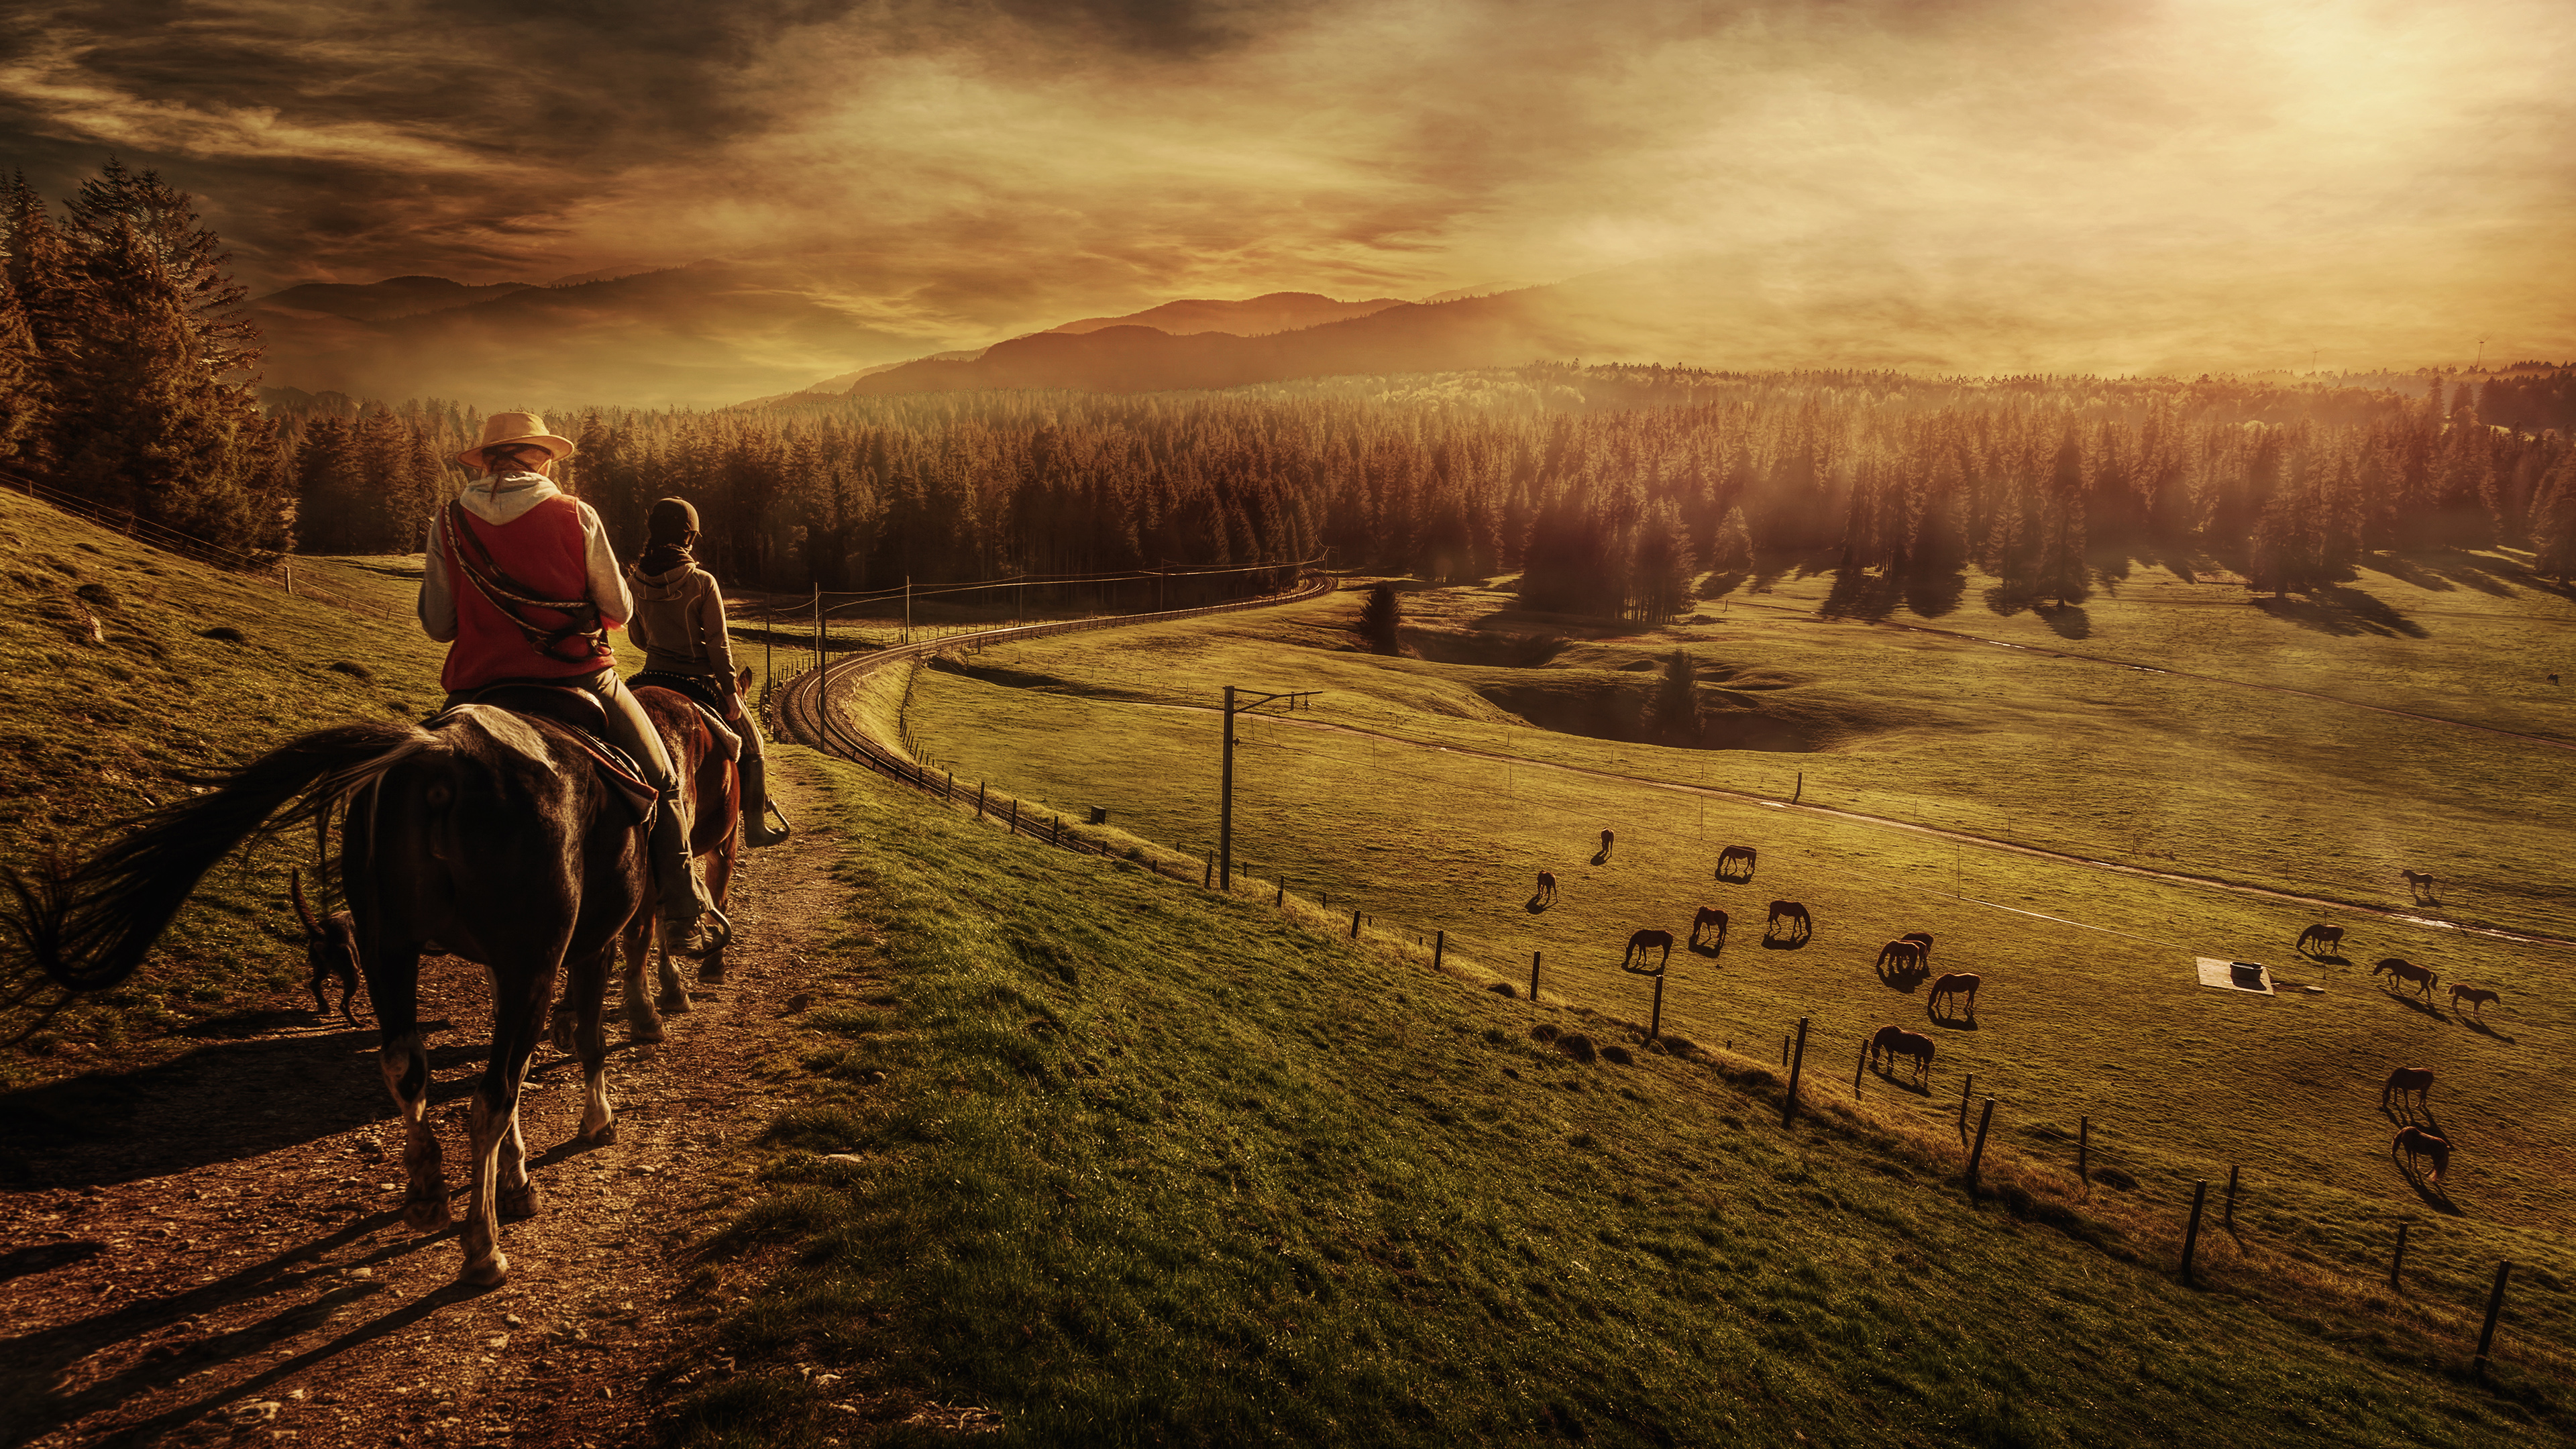 photography, landscape, people, horse, horse riding, sunset for android